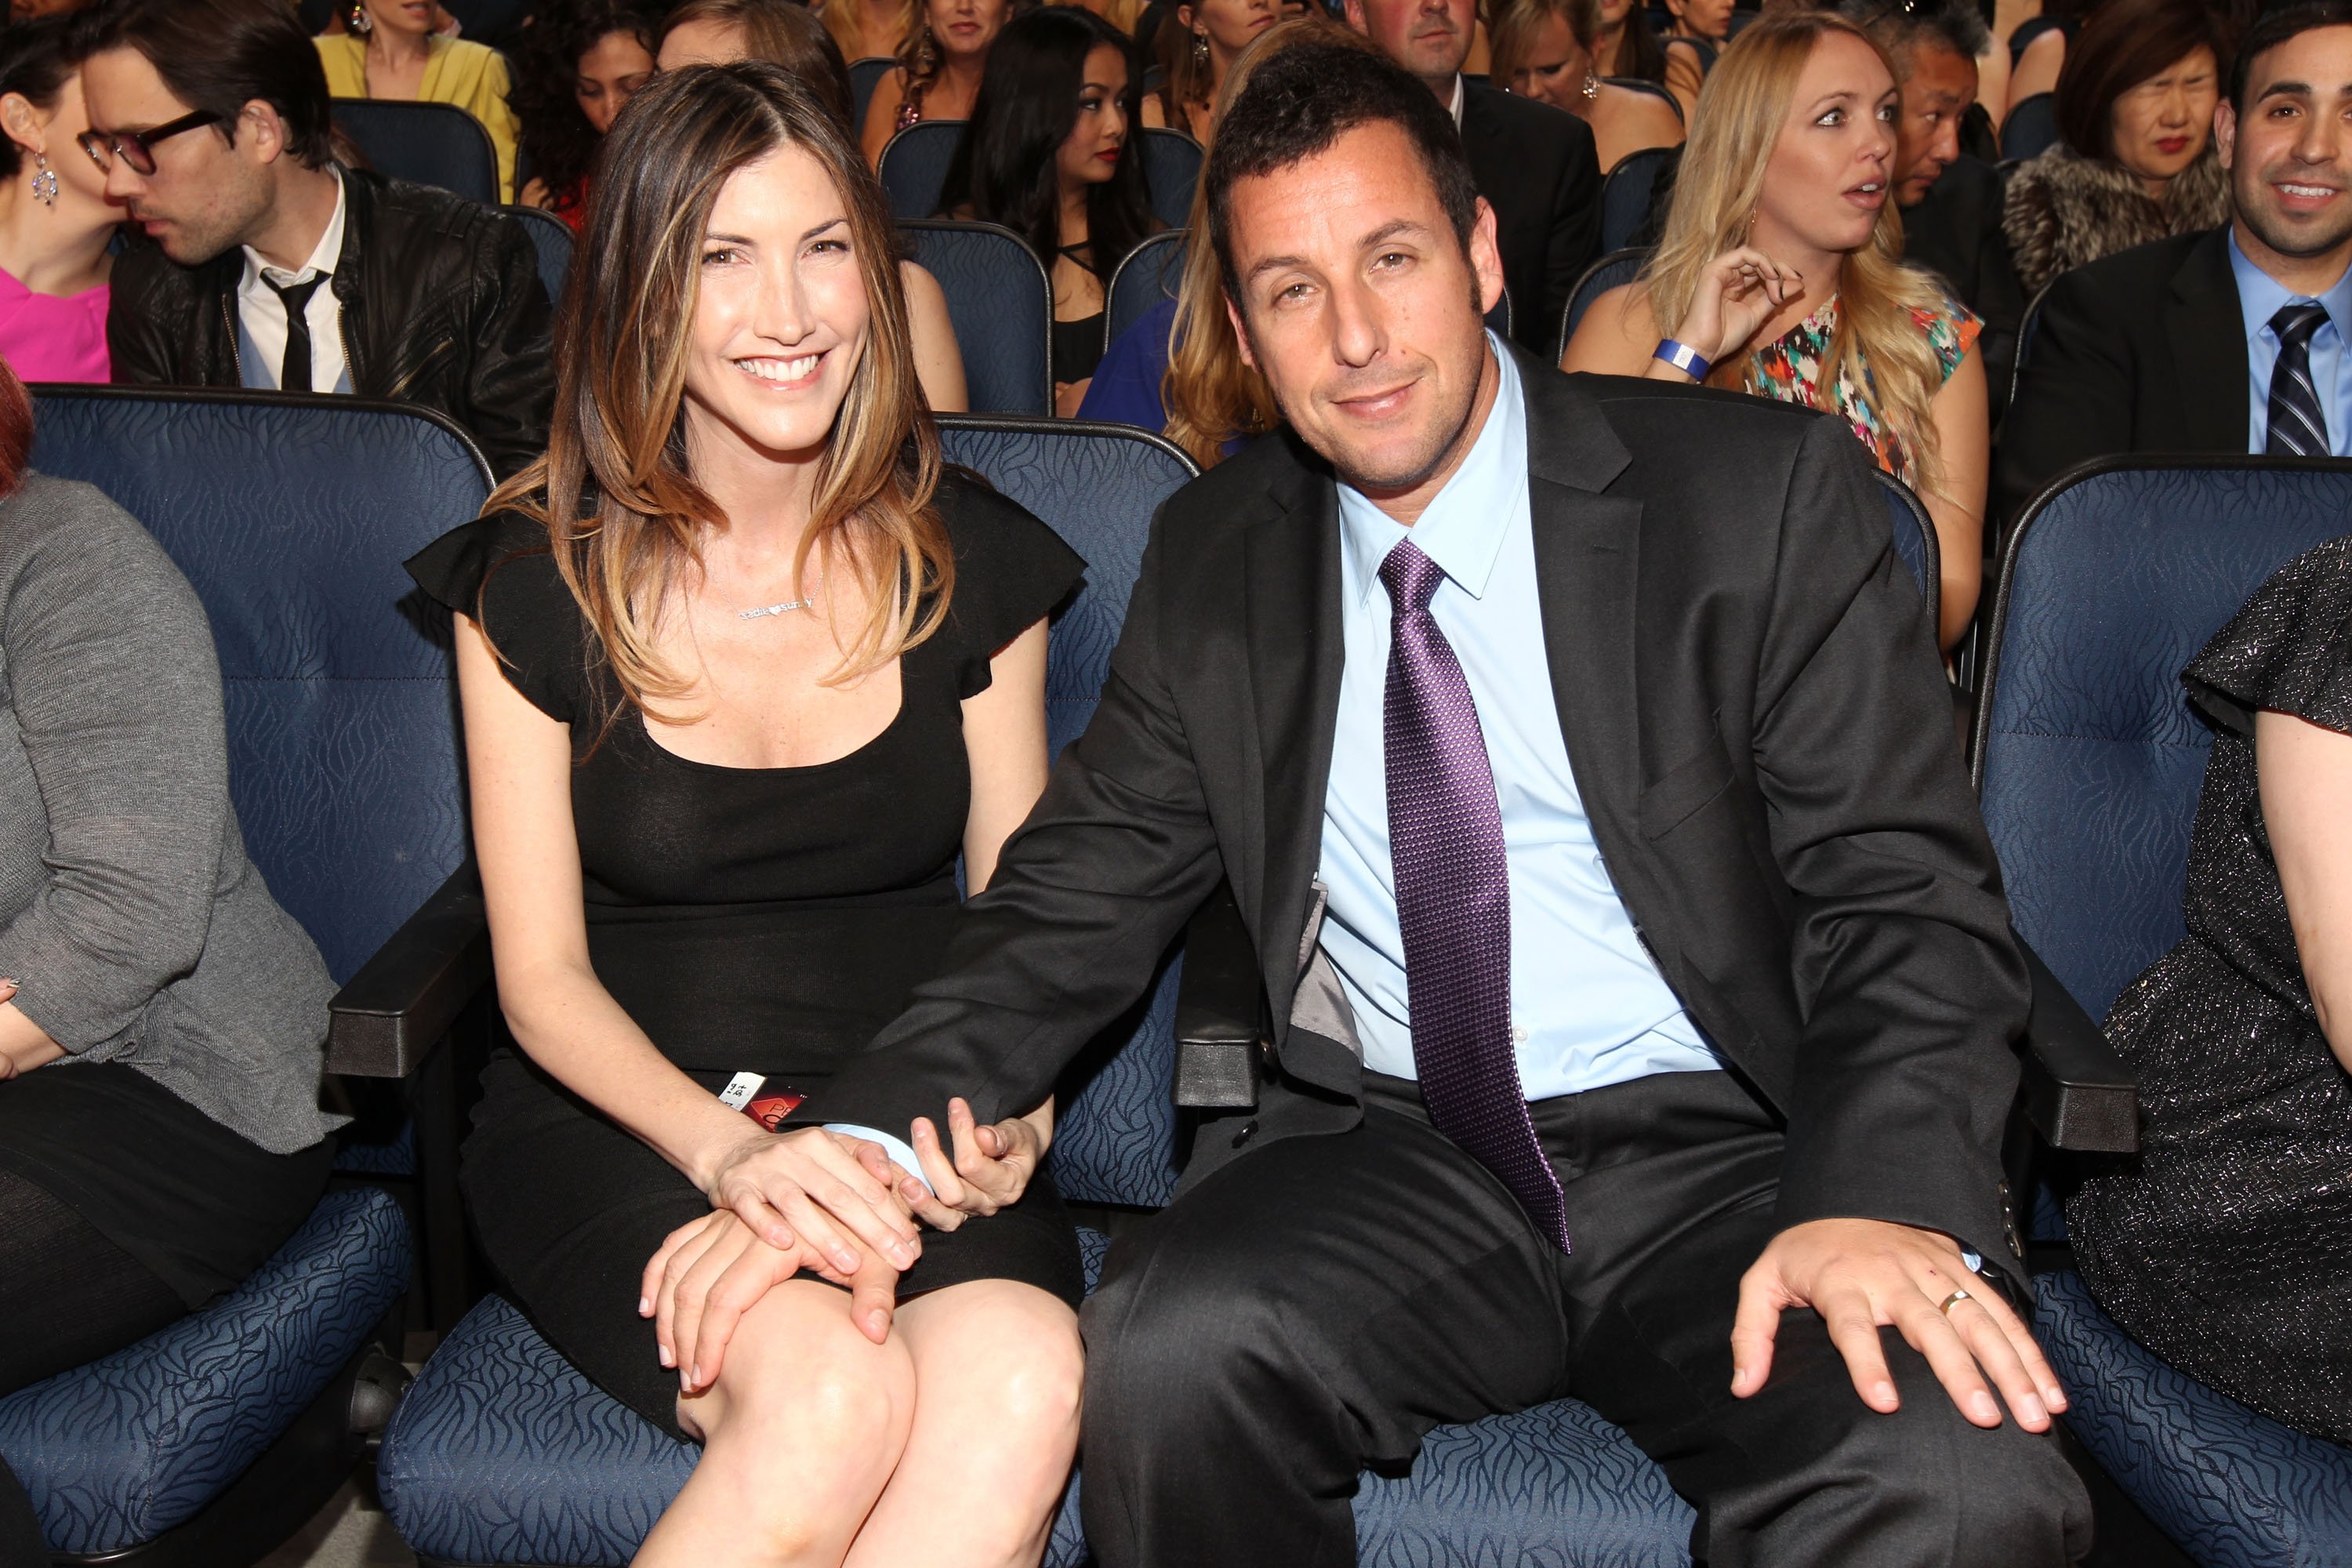 LOS ANGELES, CA - JANUARY 11: Actors Adam Sandler and Jackie Sandler pose in the audience during the the 2012 People's Choice Awards at Nokia Theatre L.A. Live on January 11, 2012 in Los Angeles, California. (Photo by Christopher Polk/Getty Images for PCA)